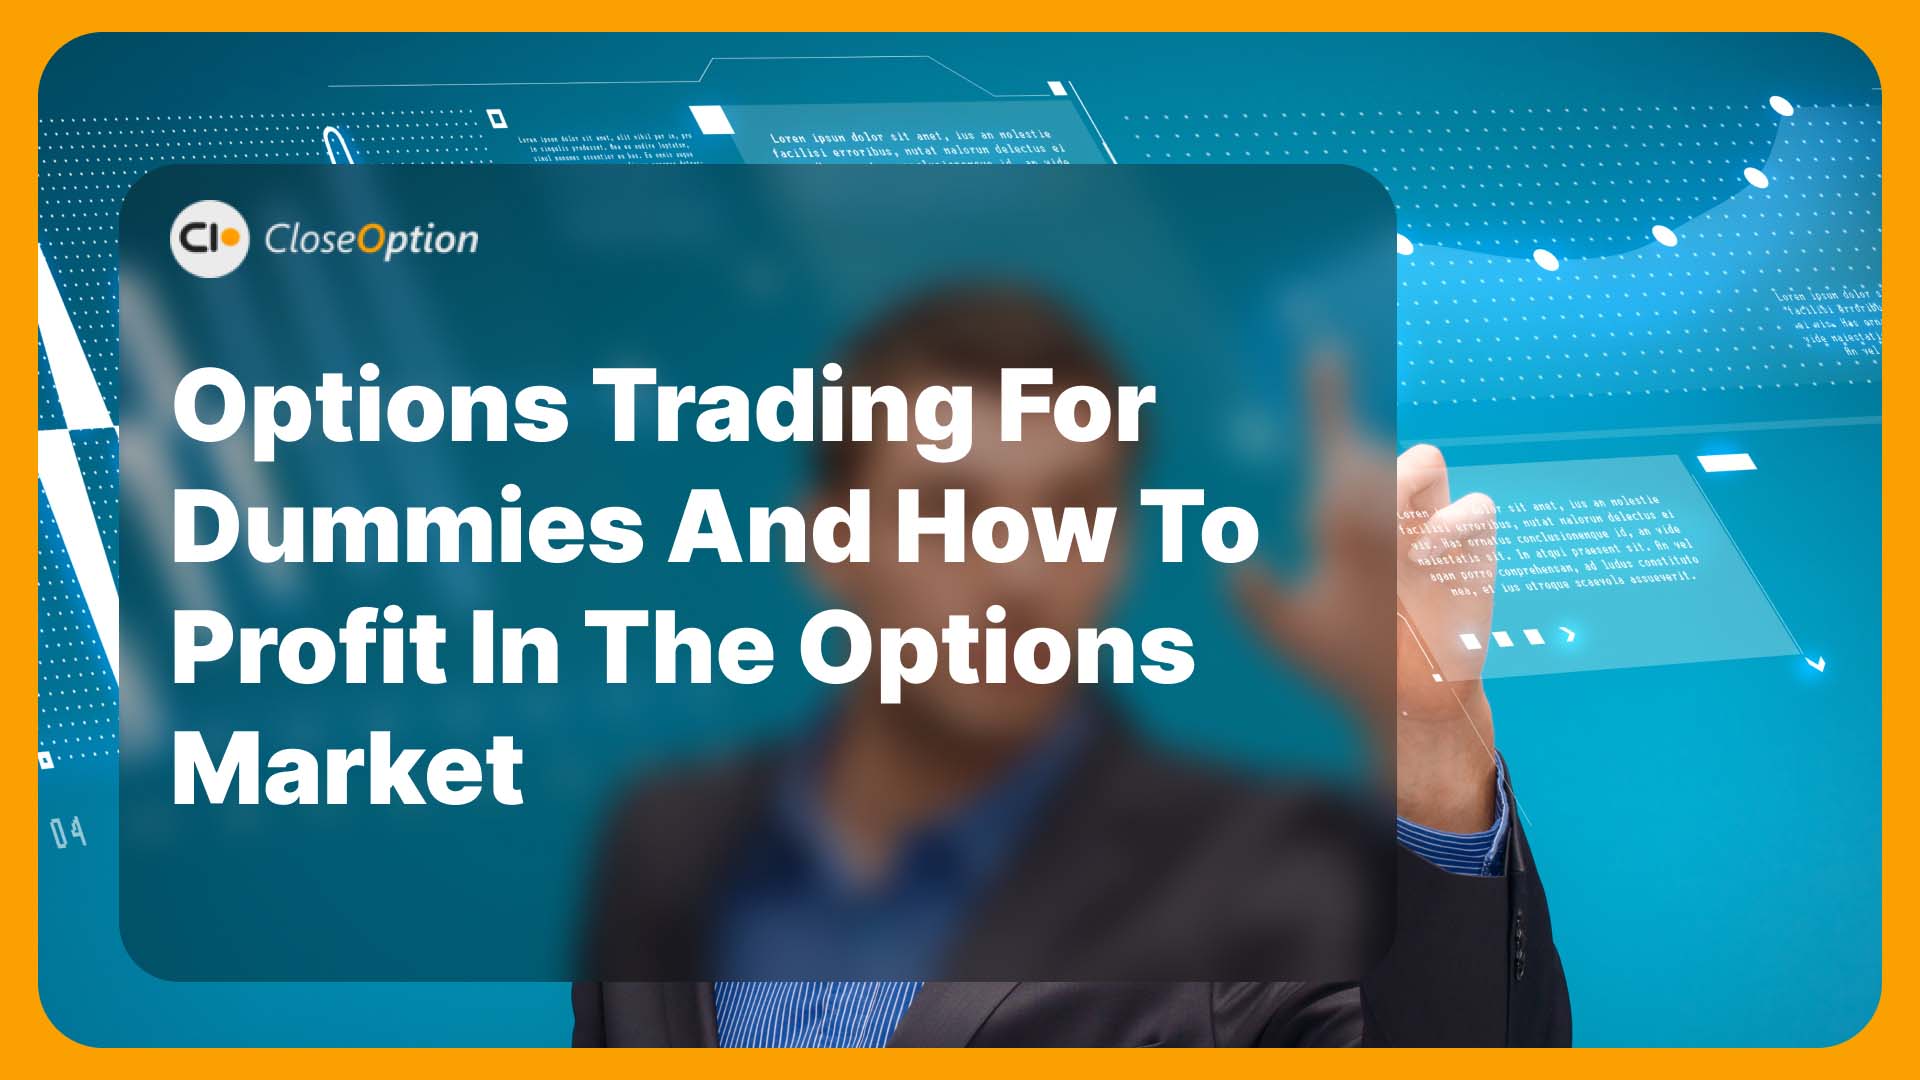 Options Trading For Dummies and How to Profit in the Options Market